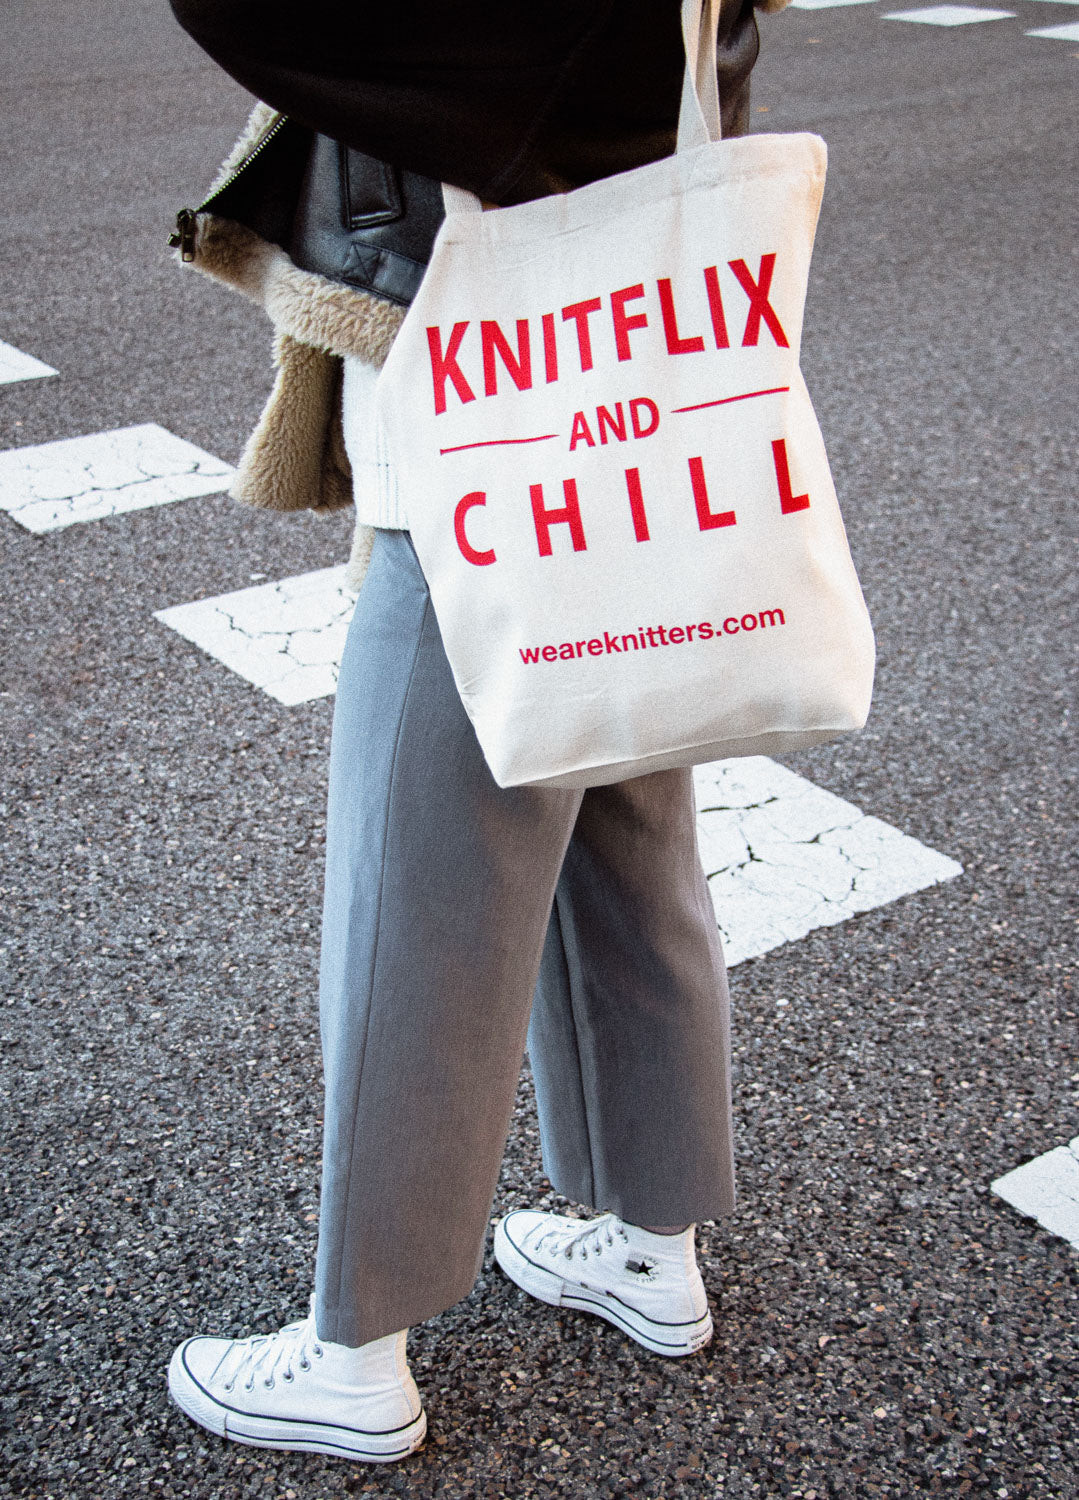 & We Chill Knitflix – are Bag: Tote knitters